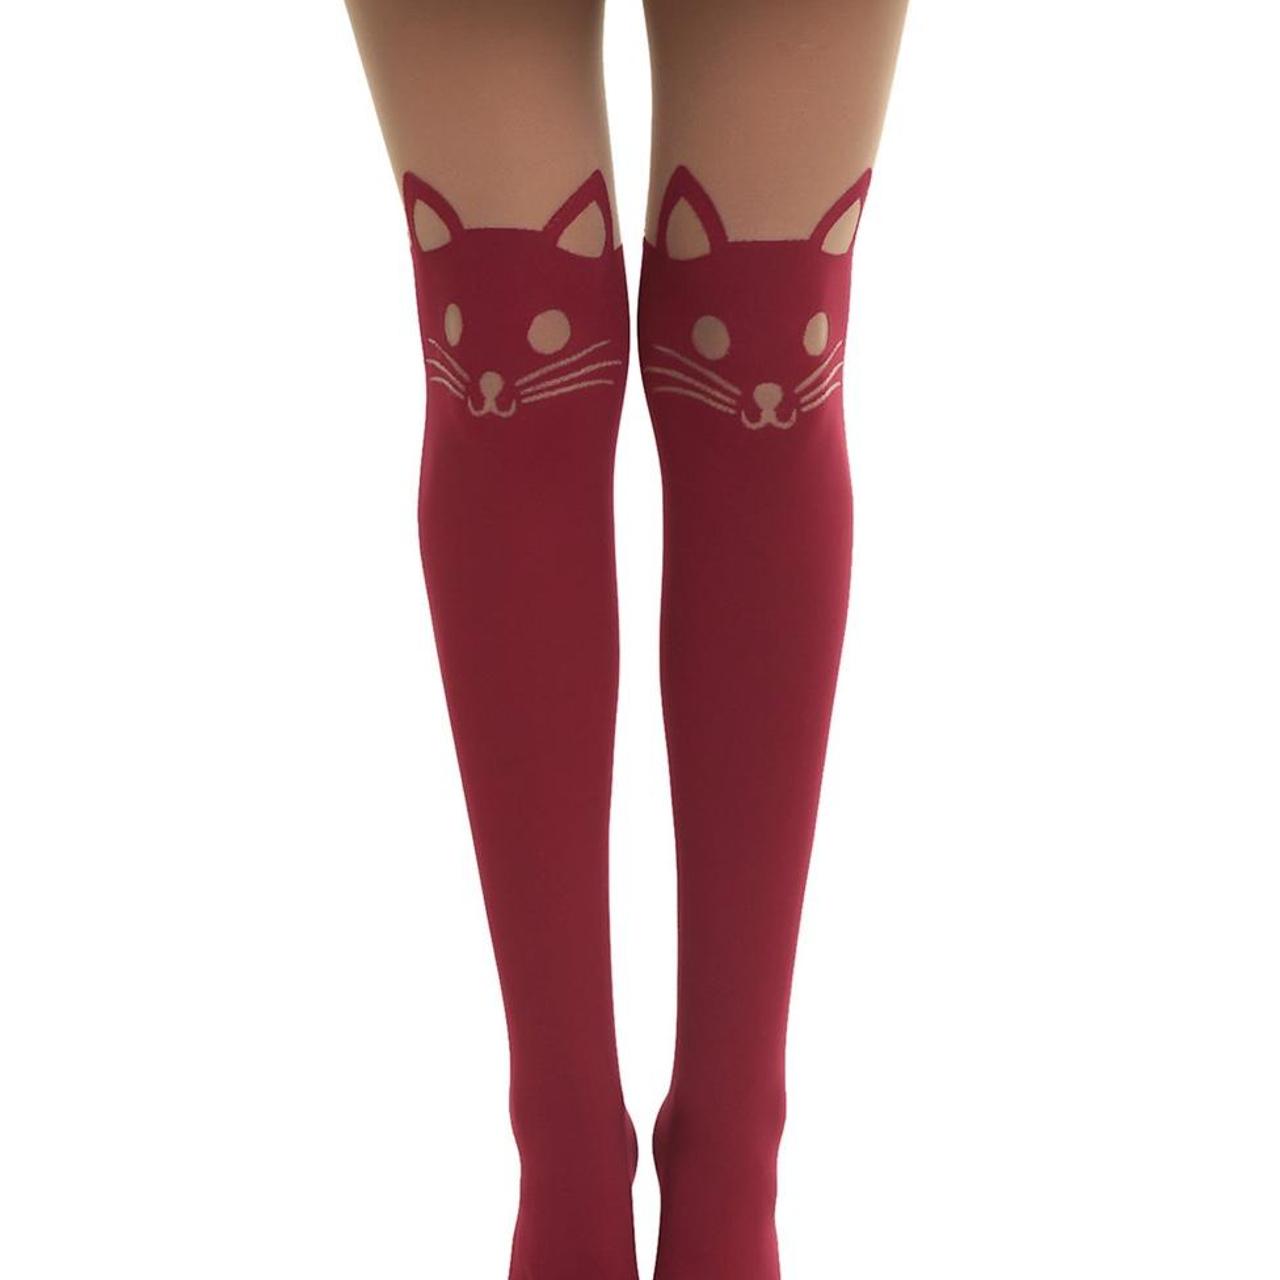 Hot Topic Women's Burgundy and Tan Hosiery-tights